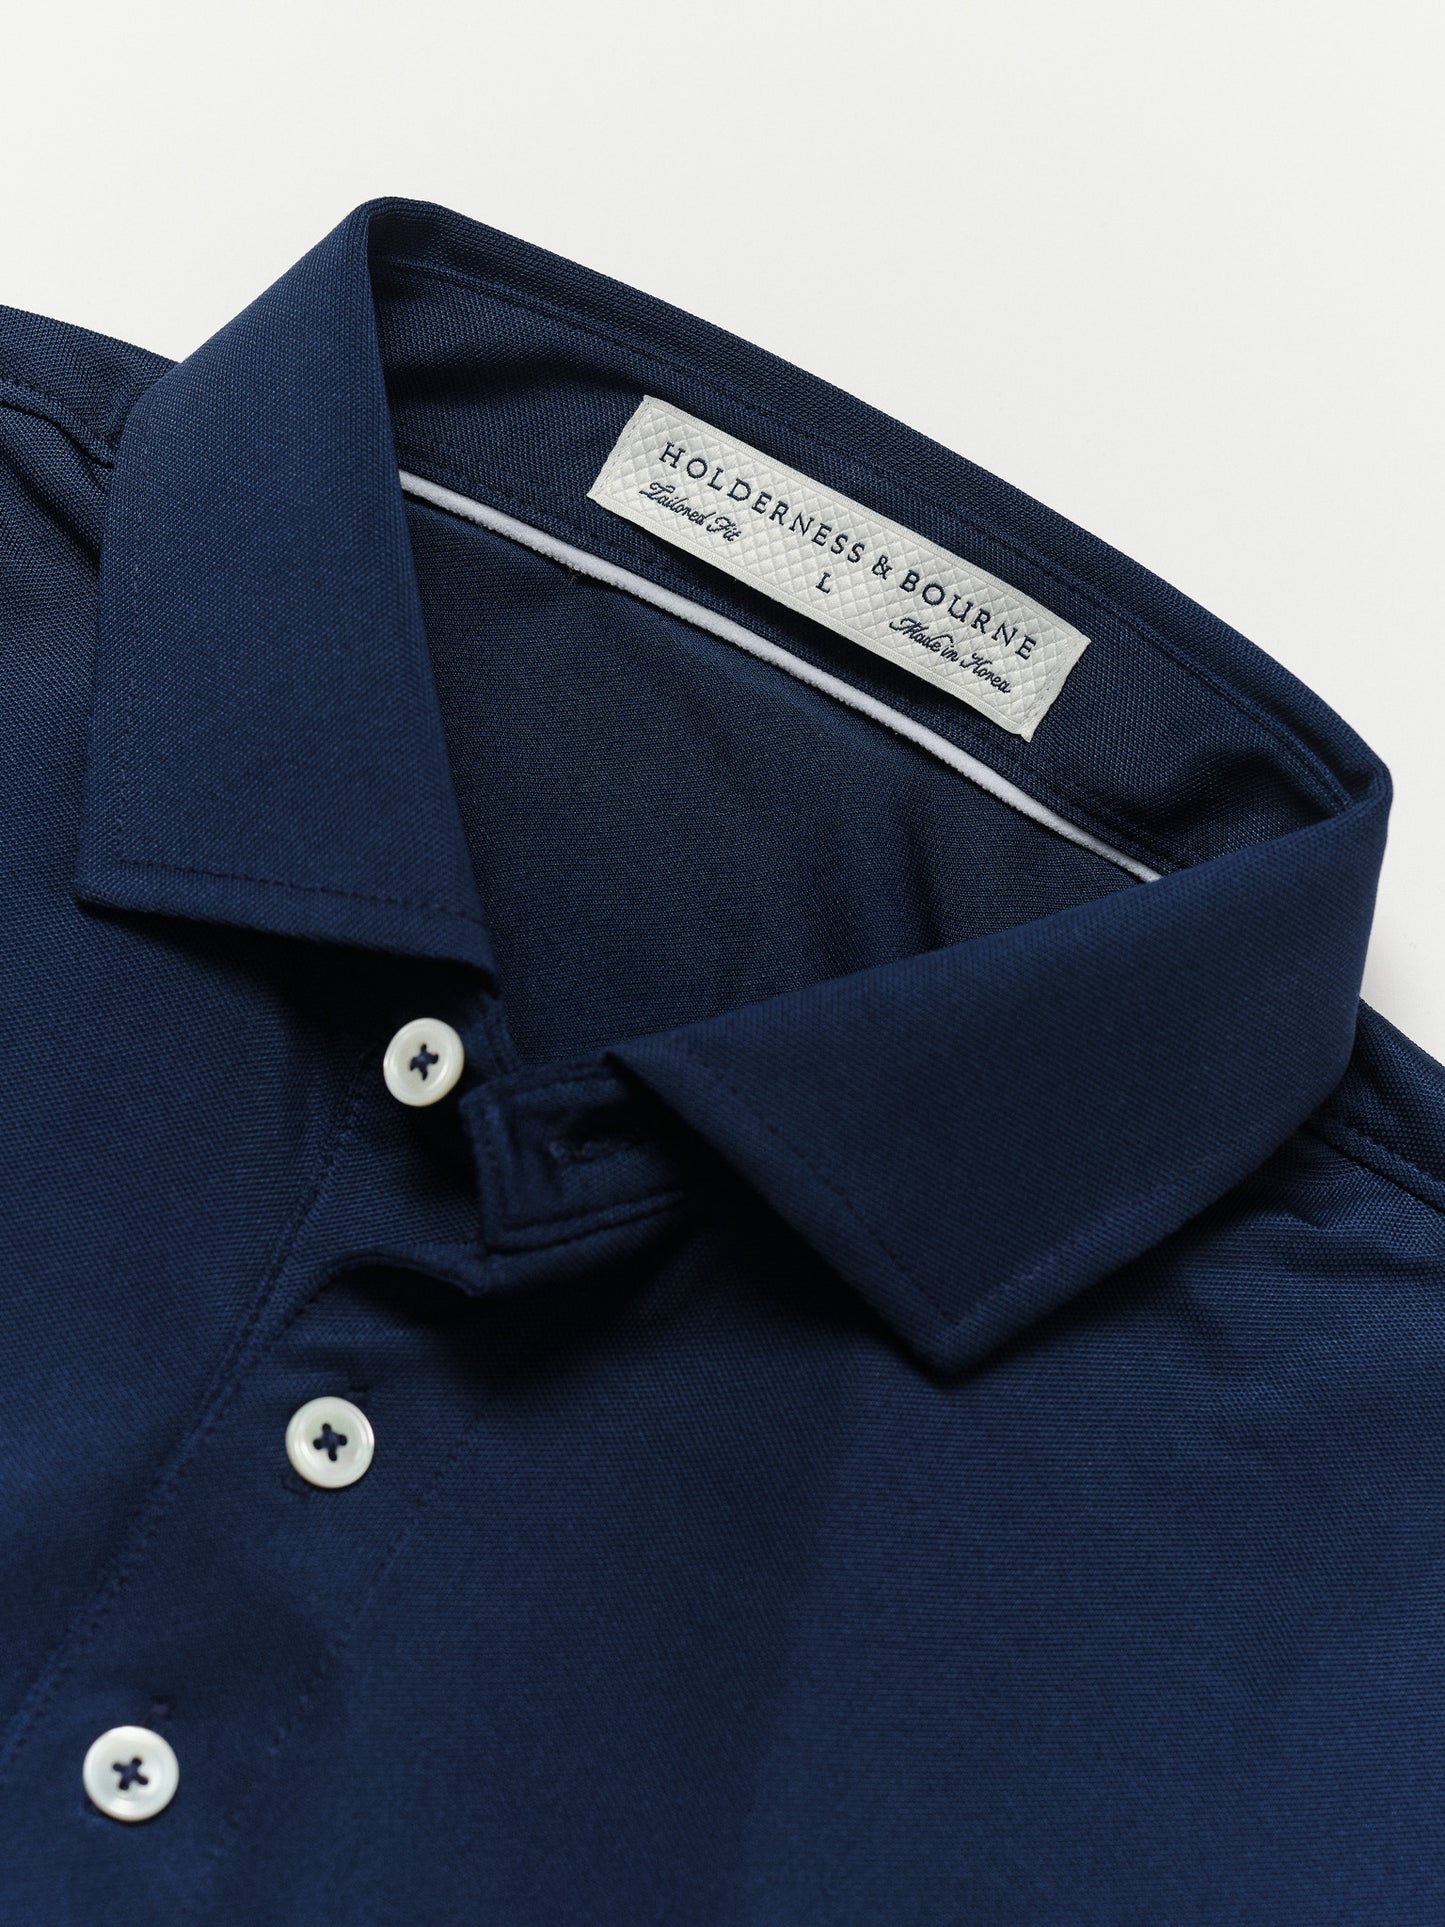 Holderness & Bourne Performance Polo in Navy – aclgolf